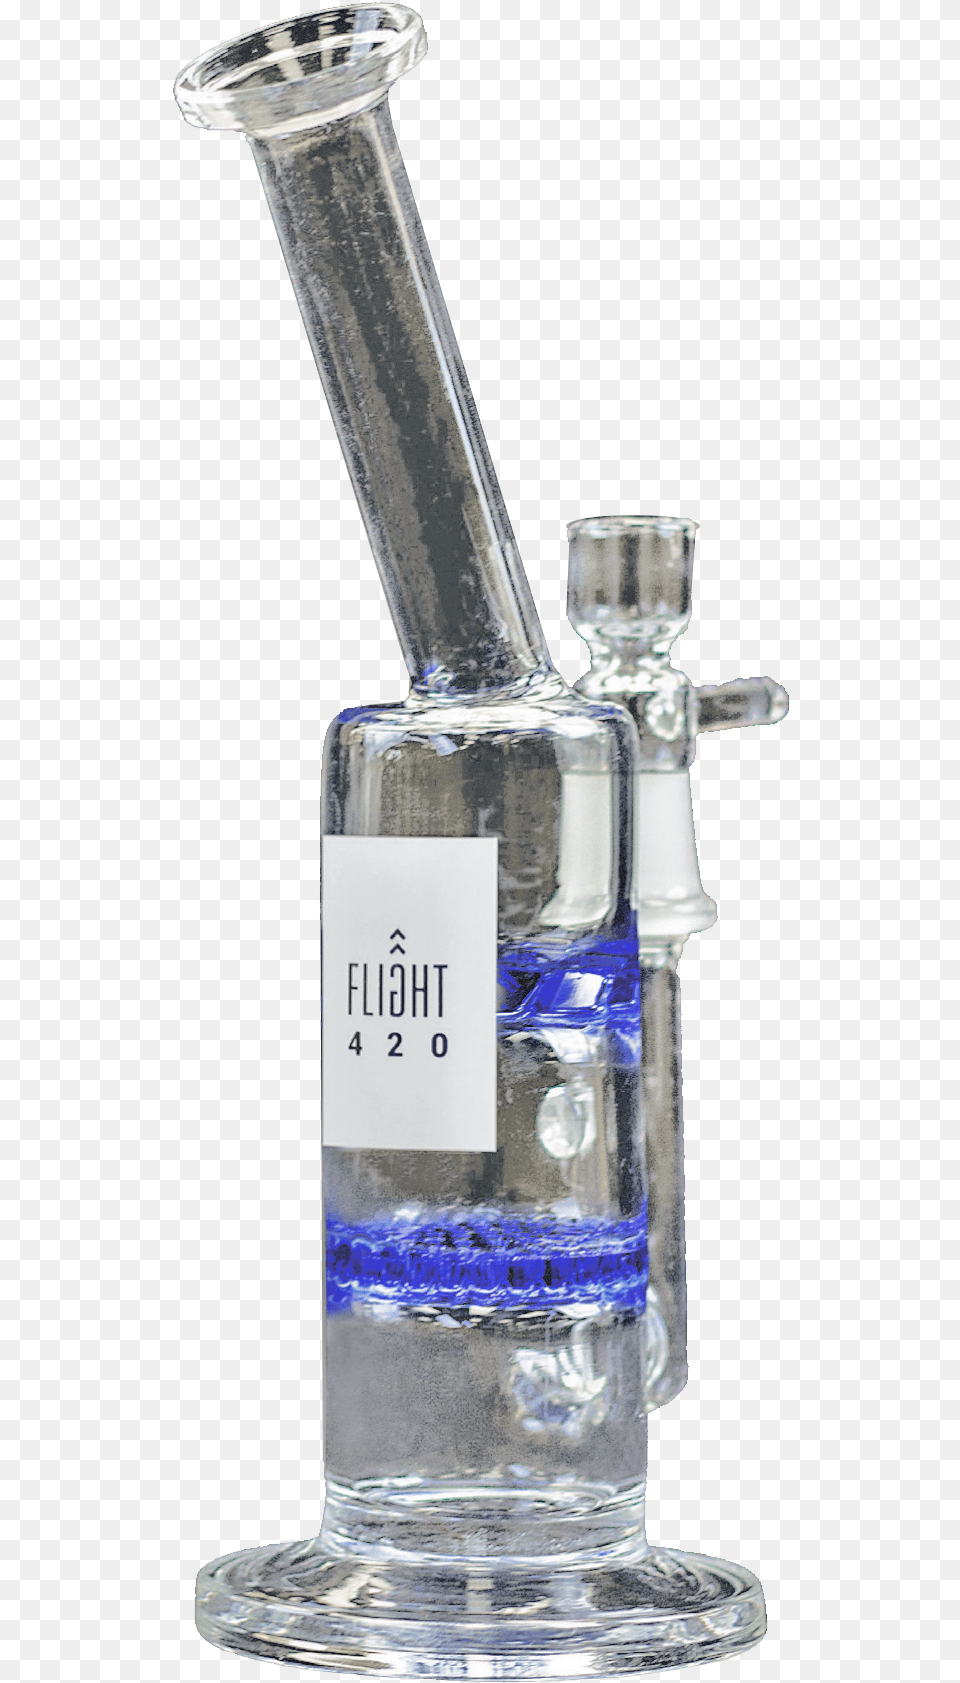 Flight 420 Water Pipe Th 10 Horizon Flight 420 Th, Smoke Pipe, Cup, Cannon, Weapon Free Png